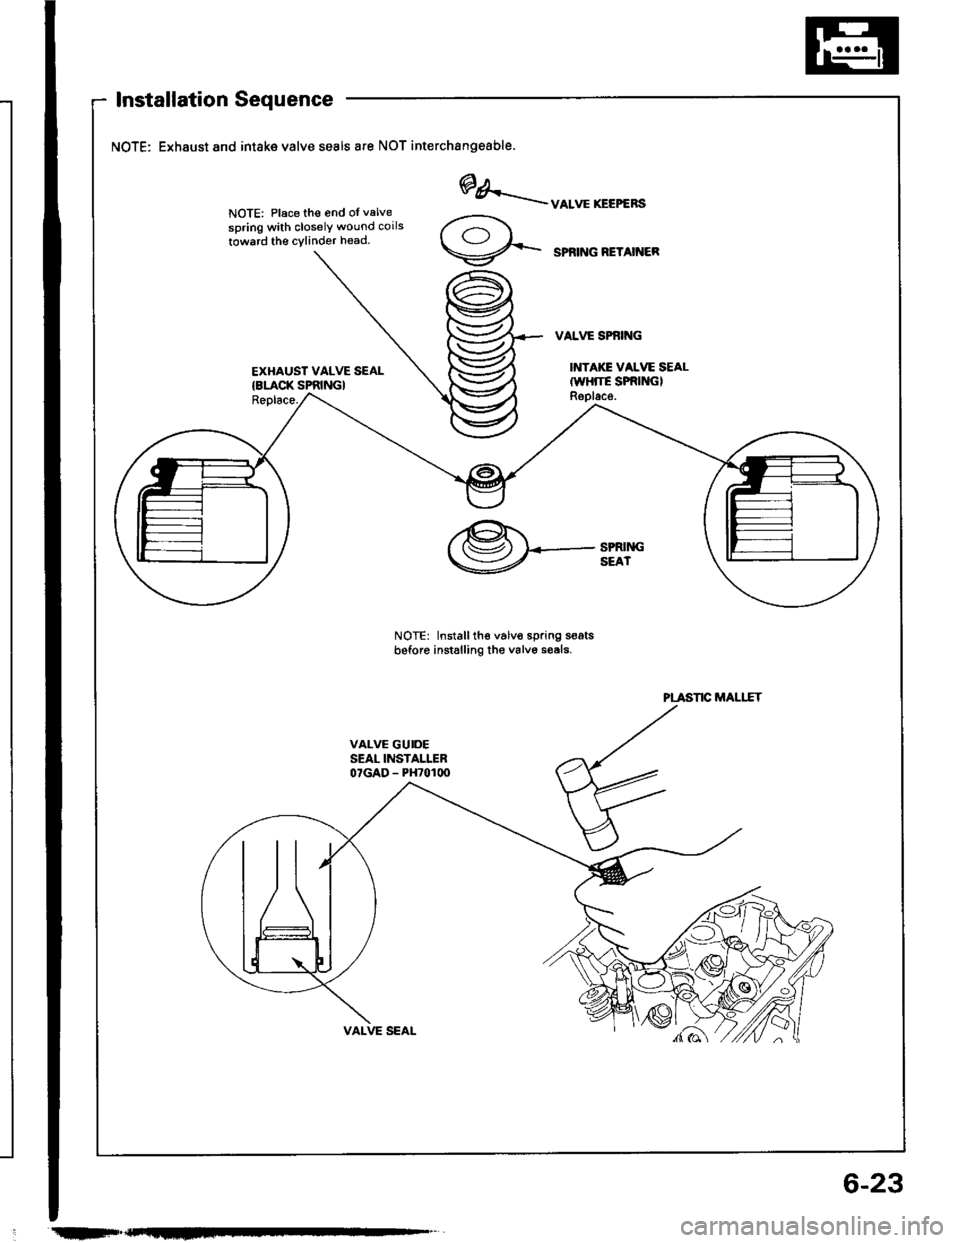 HONDA INTEGRA 1994 4.G Workshop Manual Installation Sequence
NOTE: Exhaust and intake valve seals ate NOT interchangeable.
NOTE: Place th€ 6nd oI valve
spring with closelY wound coils
towrrd th€ cylinder head.
EXHAUST VALVE SEAL{8LACK 